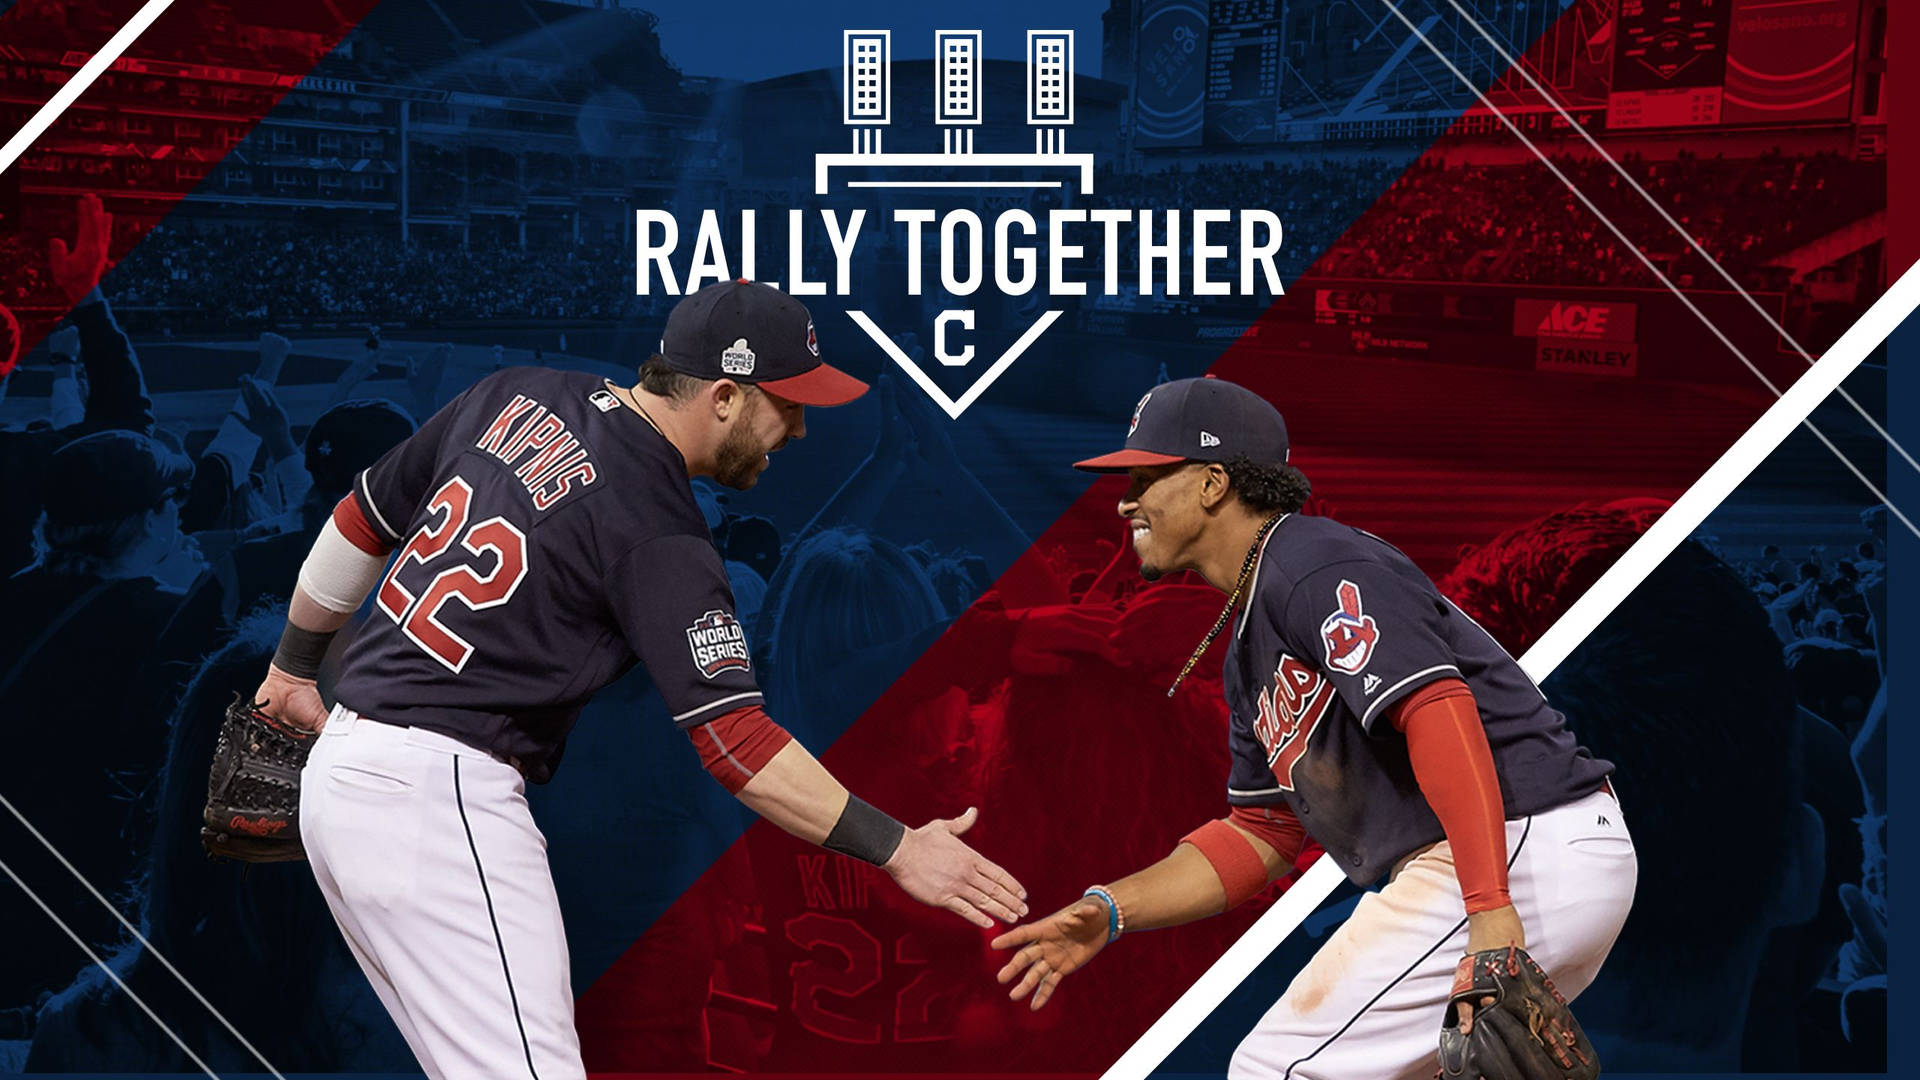 Cleveland Indians Rally Together World Series Wallpaper